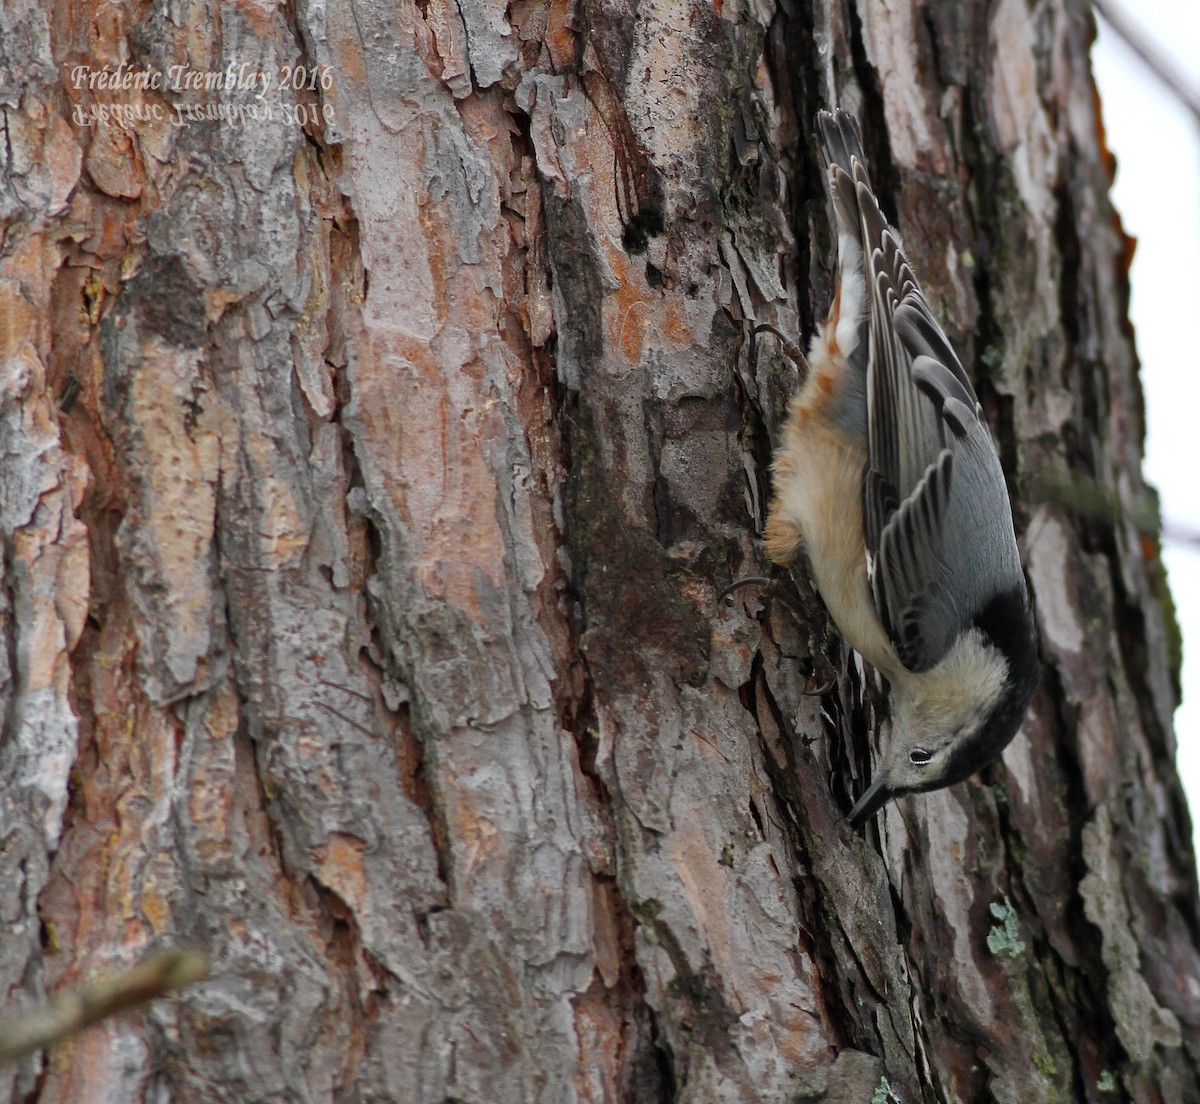 White-breasted Nuthatch - frederic tremblay